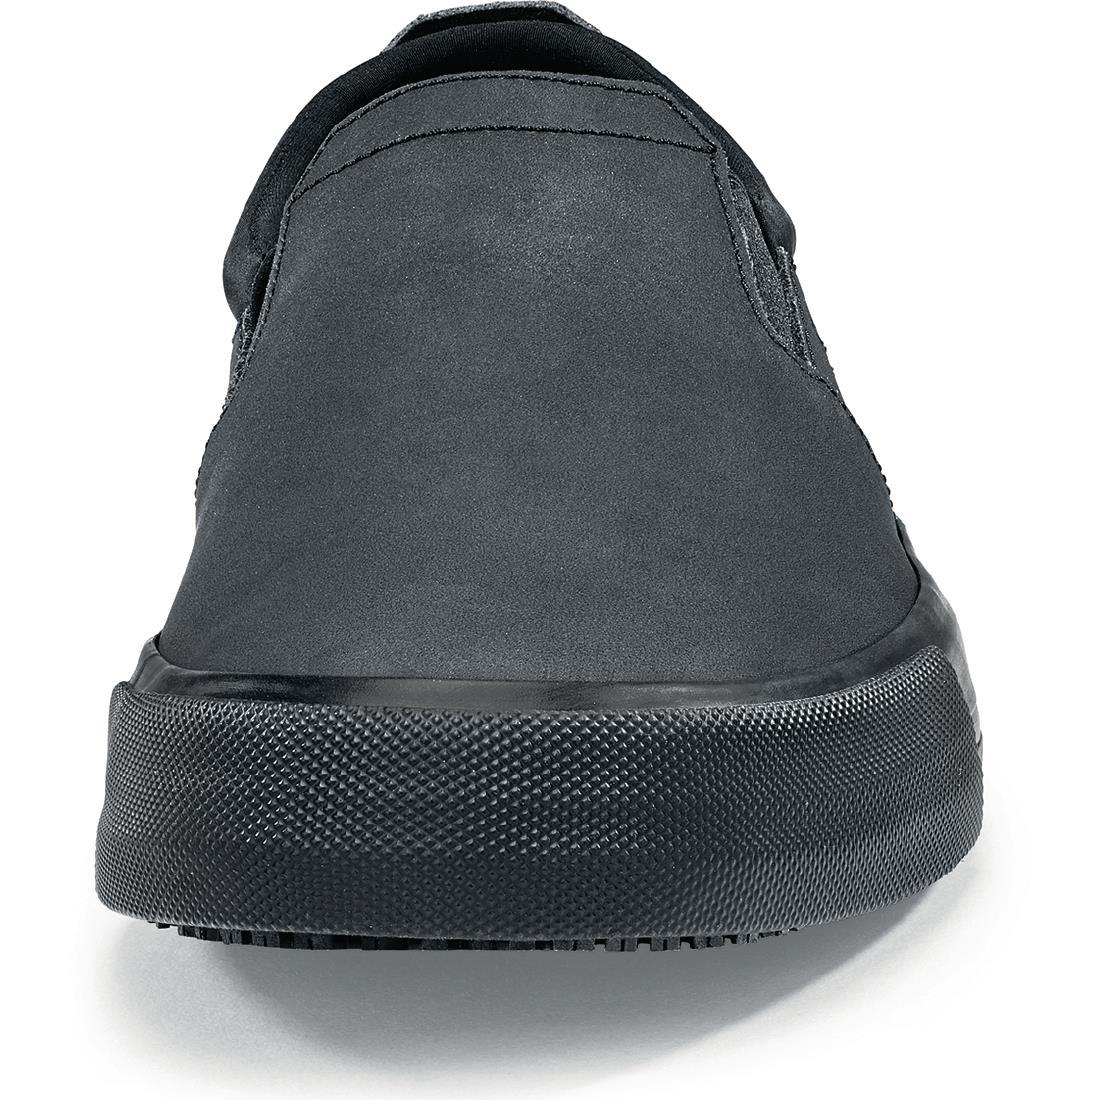 Shoes for Crews Leather Slip On Size 42 - BB163-42  - 2